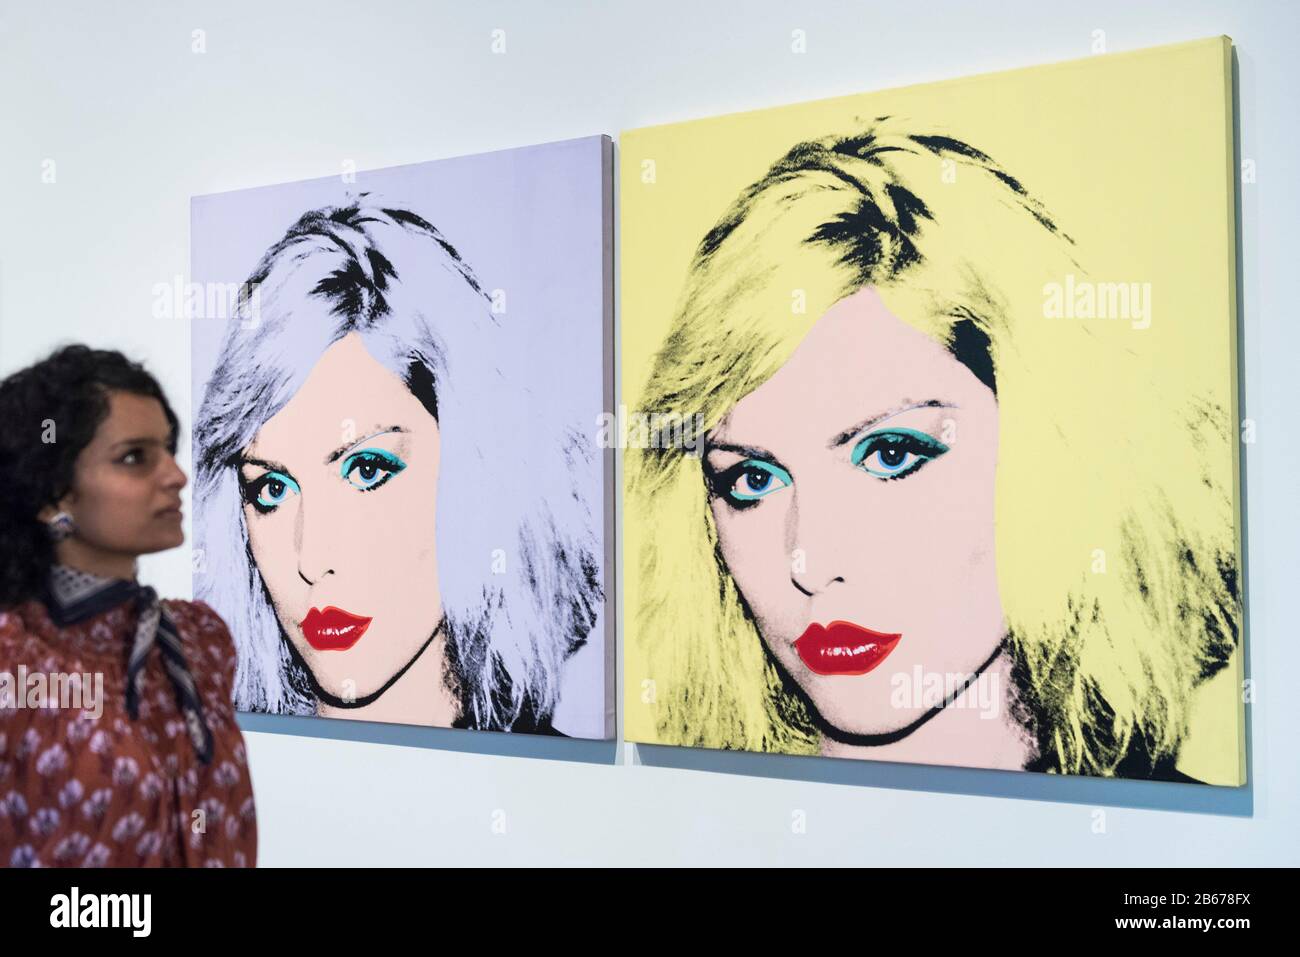 London, UK.  10 March 2020. A staff member poses next to 'Debbie Harry', 1980, by Andy Warhol. Preview of 'Andy Warhol', a retrospective of over 100 works by one of the most recognisable artists of the late 20th century.  The exhibition runs 12 March to 6 September 2020 at Tate Modern. Credit: Stephen Chung / Alamy Live News Stock Photo